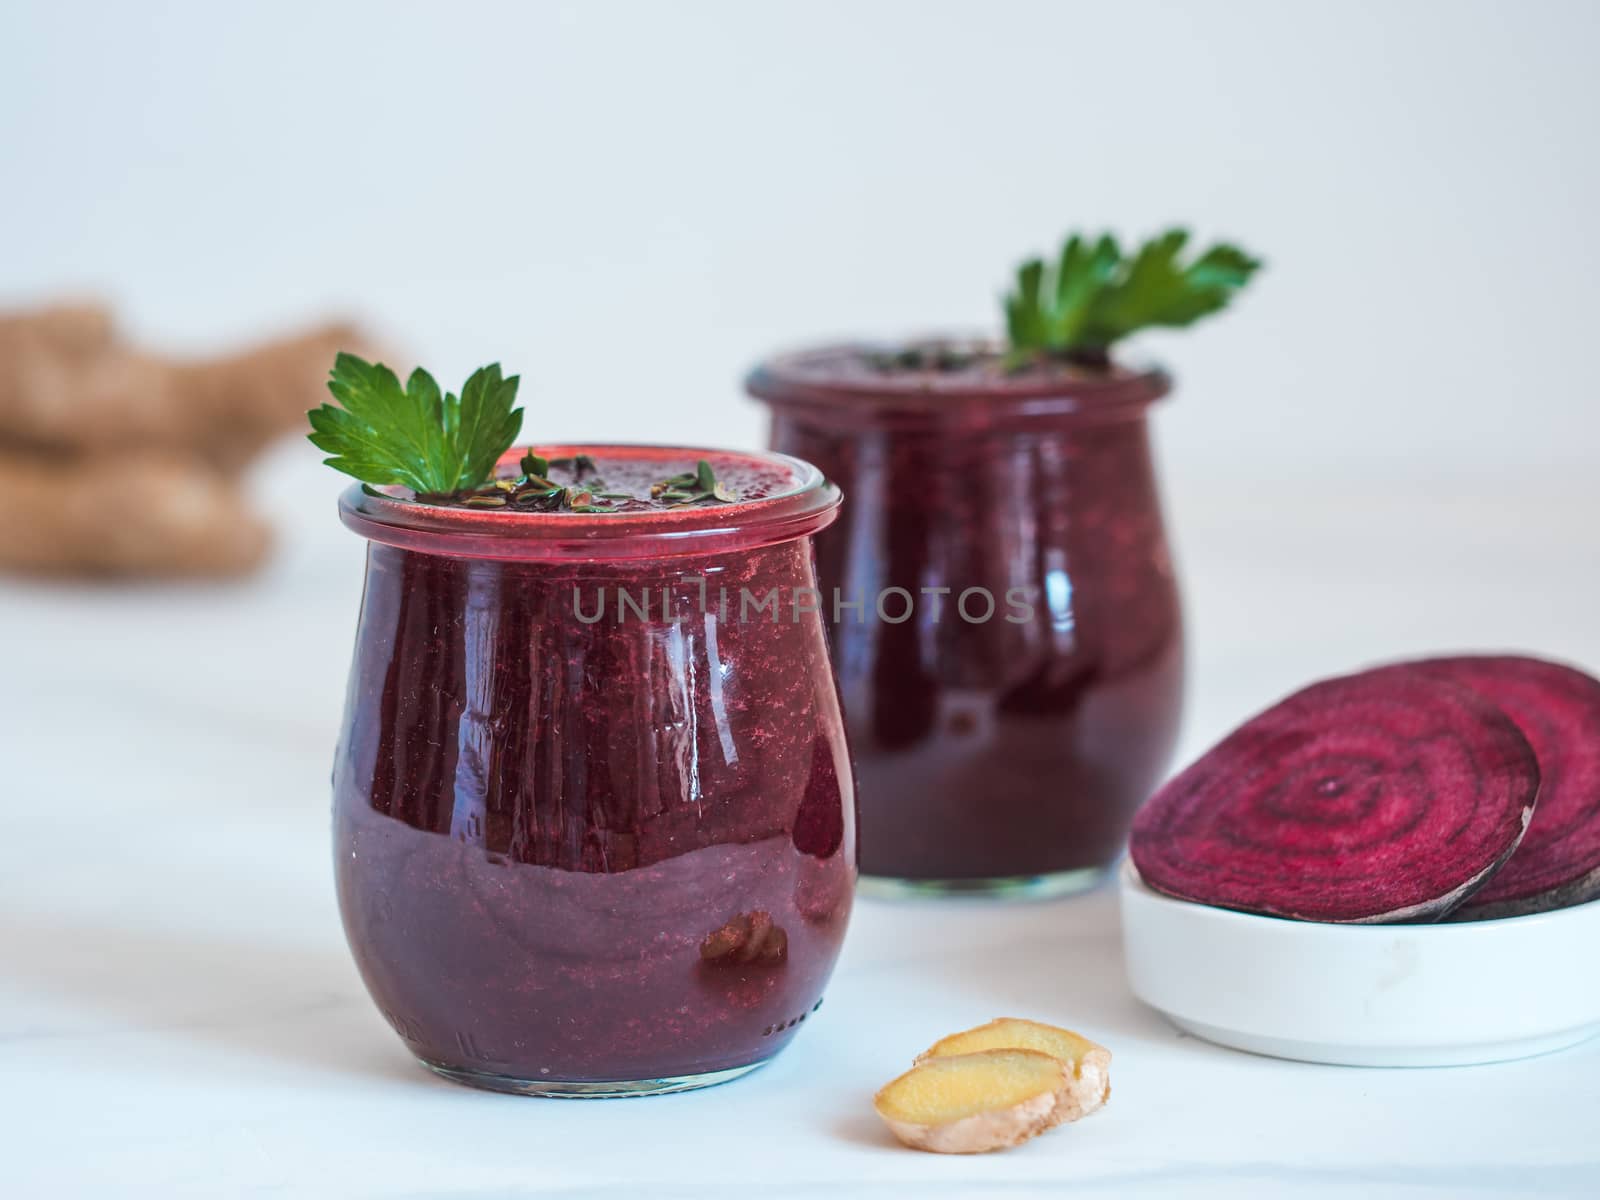 Fresh beetroot and ginger root smoothie. Beetroot smoothie in glass jar on white table. Shallow DOF. Copy space for text. Clean eating and detox concept, recipe idea.